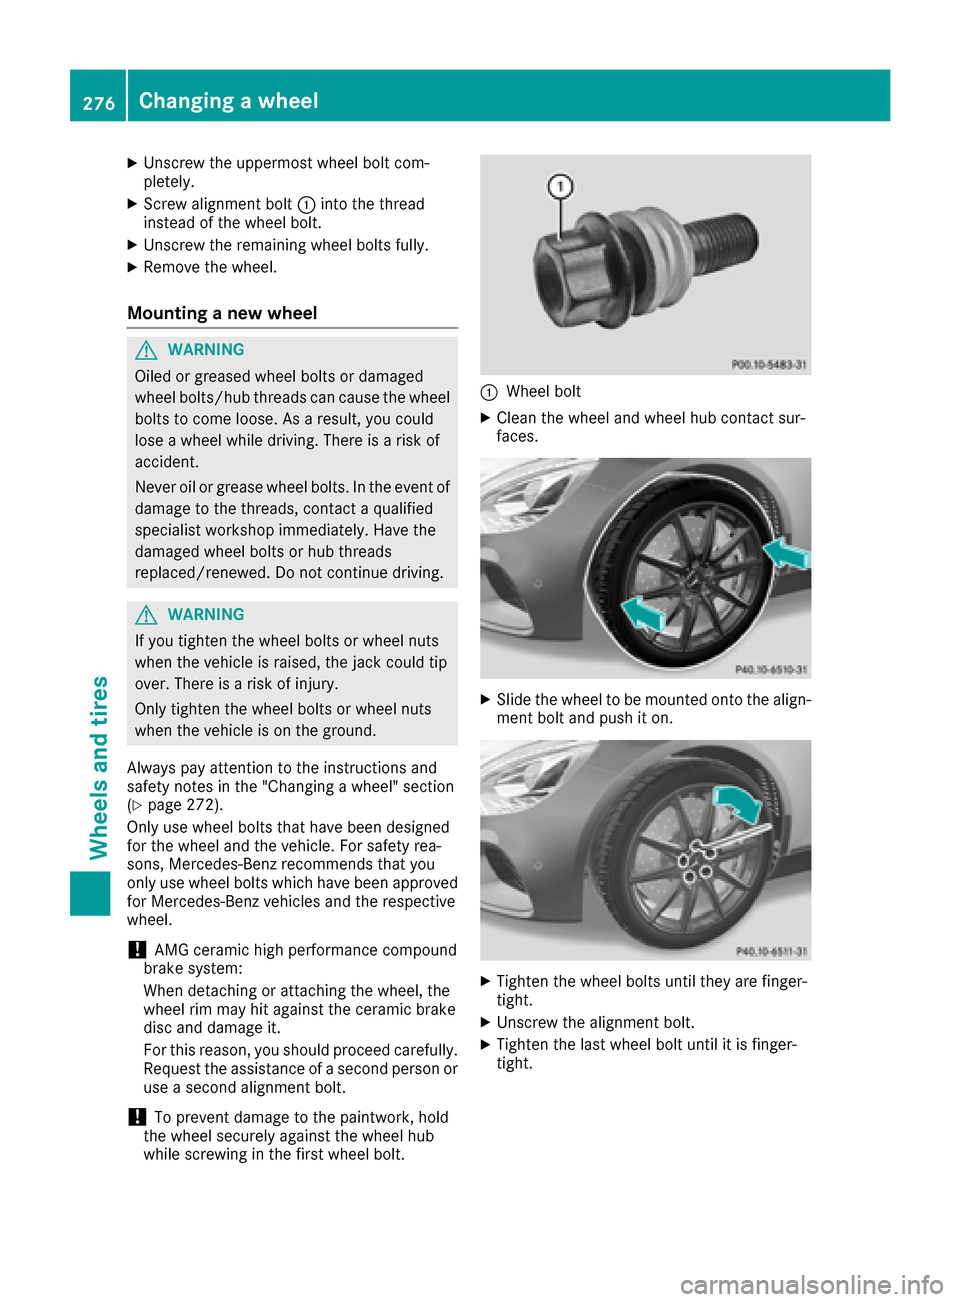 MERCEDES-BENZ AMG GT S 2017 C190 Owners Manual XUnscrew the uppermost wheel bolt com-
pletely.
XScrew alignment bolt:into the thread
instead of the wheel bolt.
XUnscrew the remaining wheel bolts fully.
XRemove the wheel.
Mounting a new wheel
GWARN